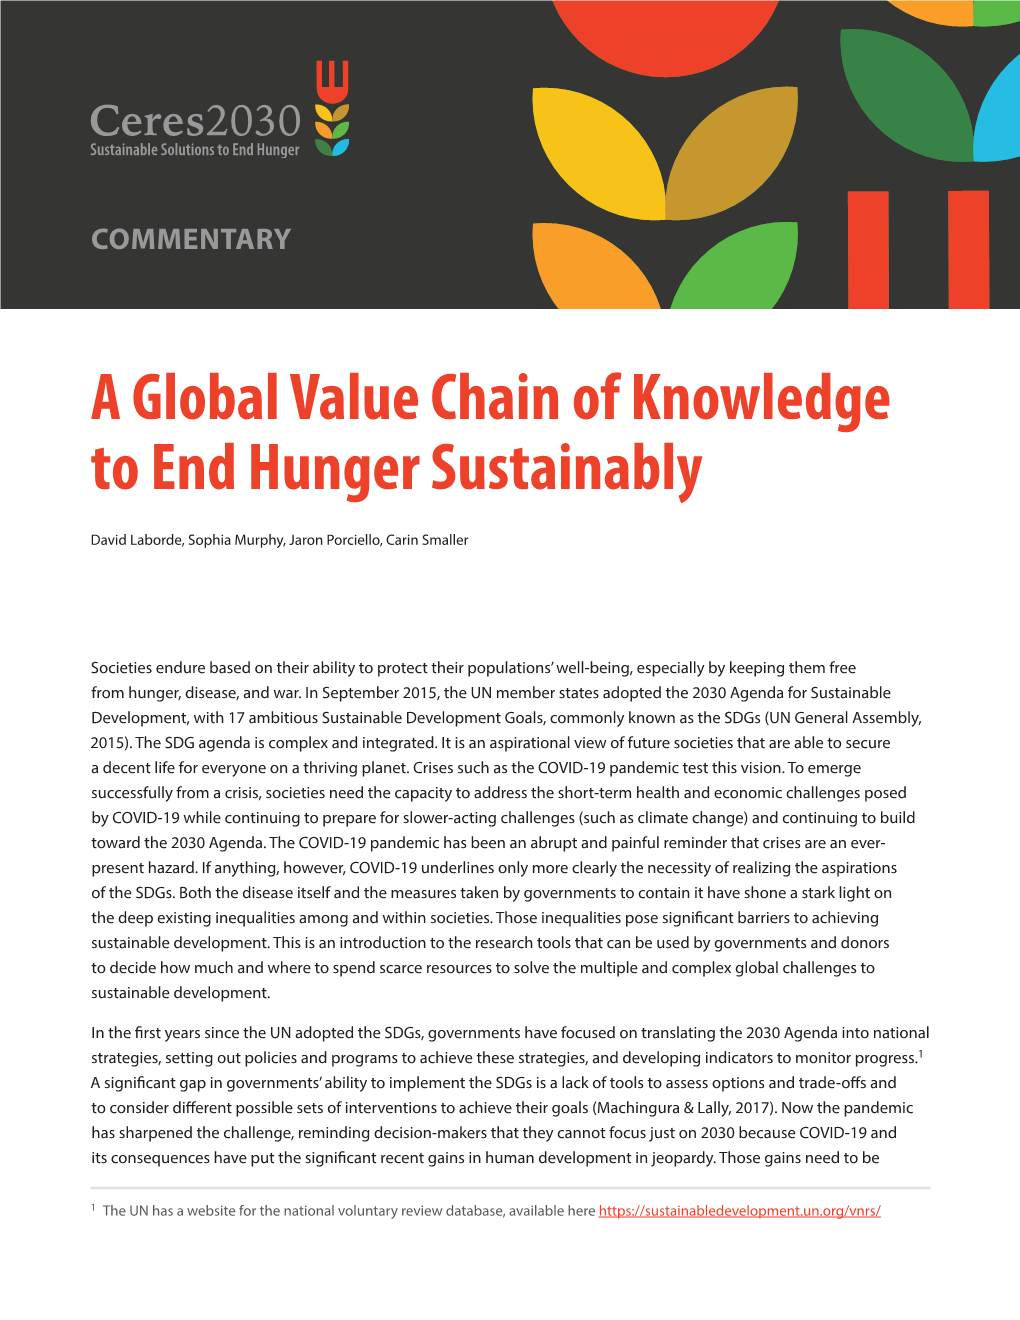 A Global Value Chain of Knowledge to End Hunger Sustainably